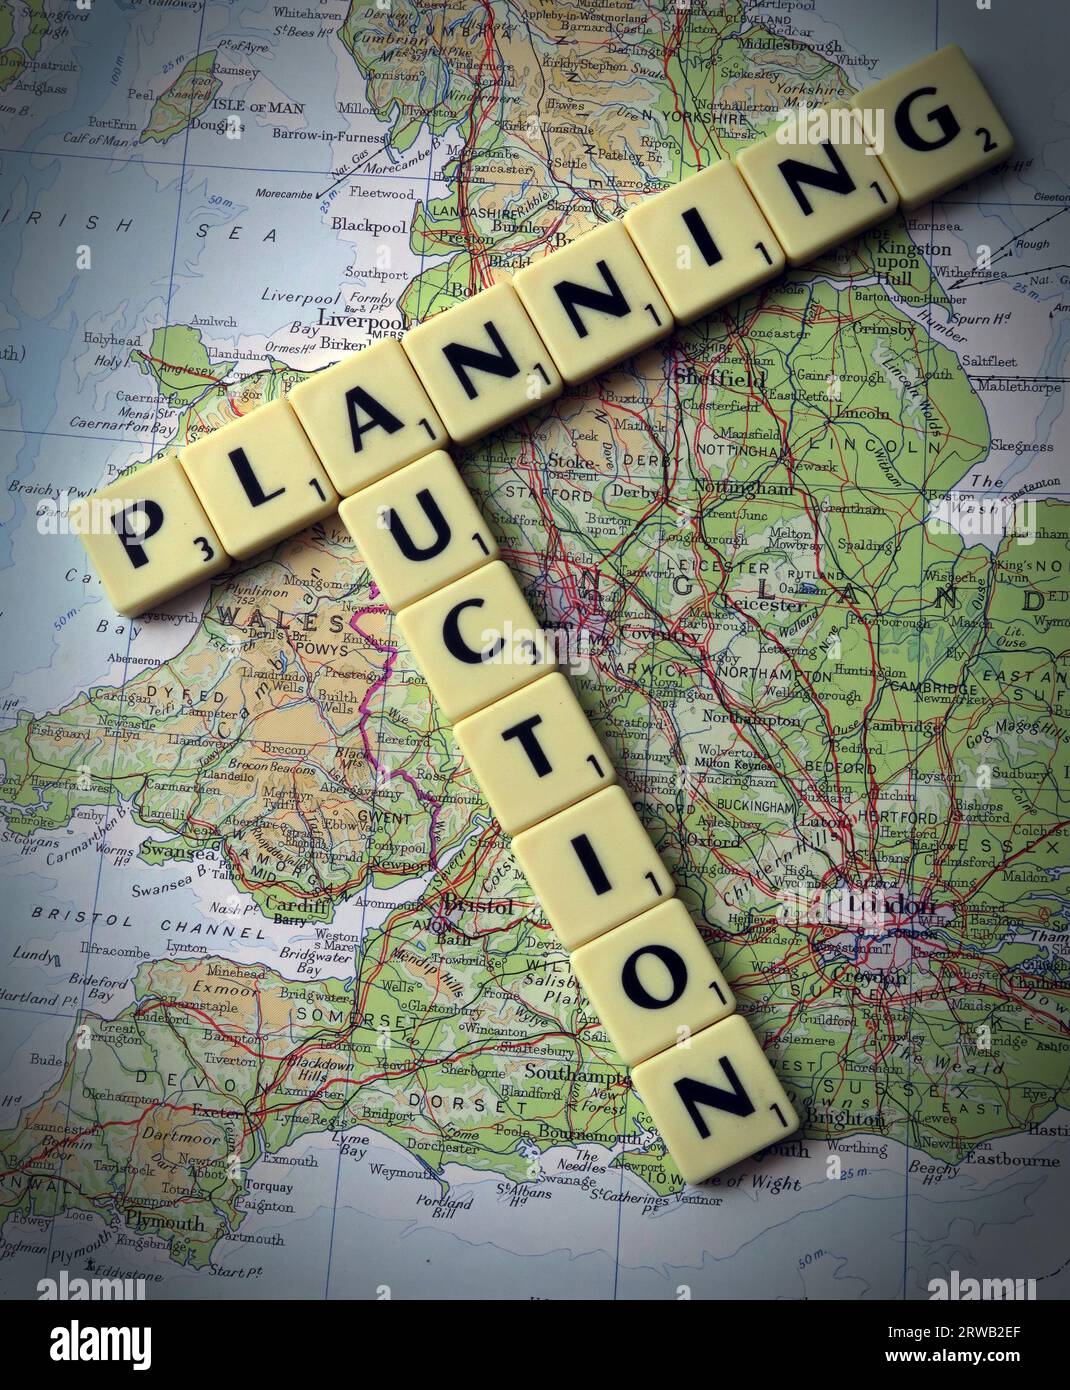 Planning Auction in Scrabble letters on a map of Great Britain, Stock Photo